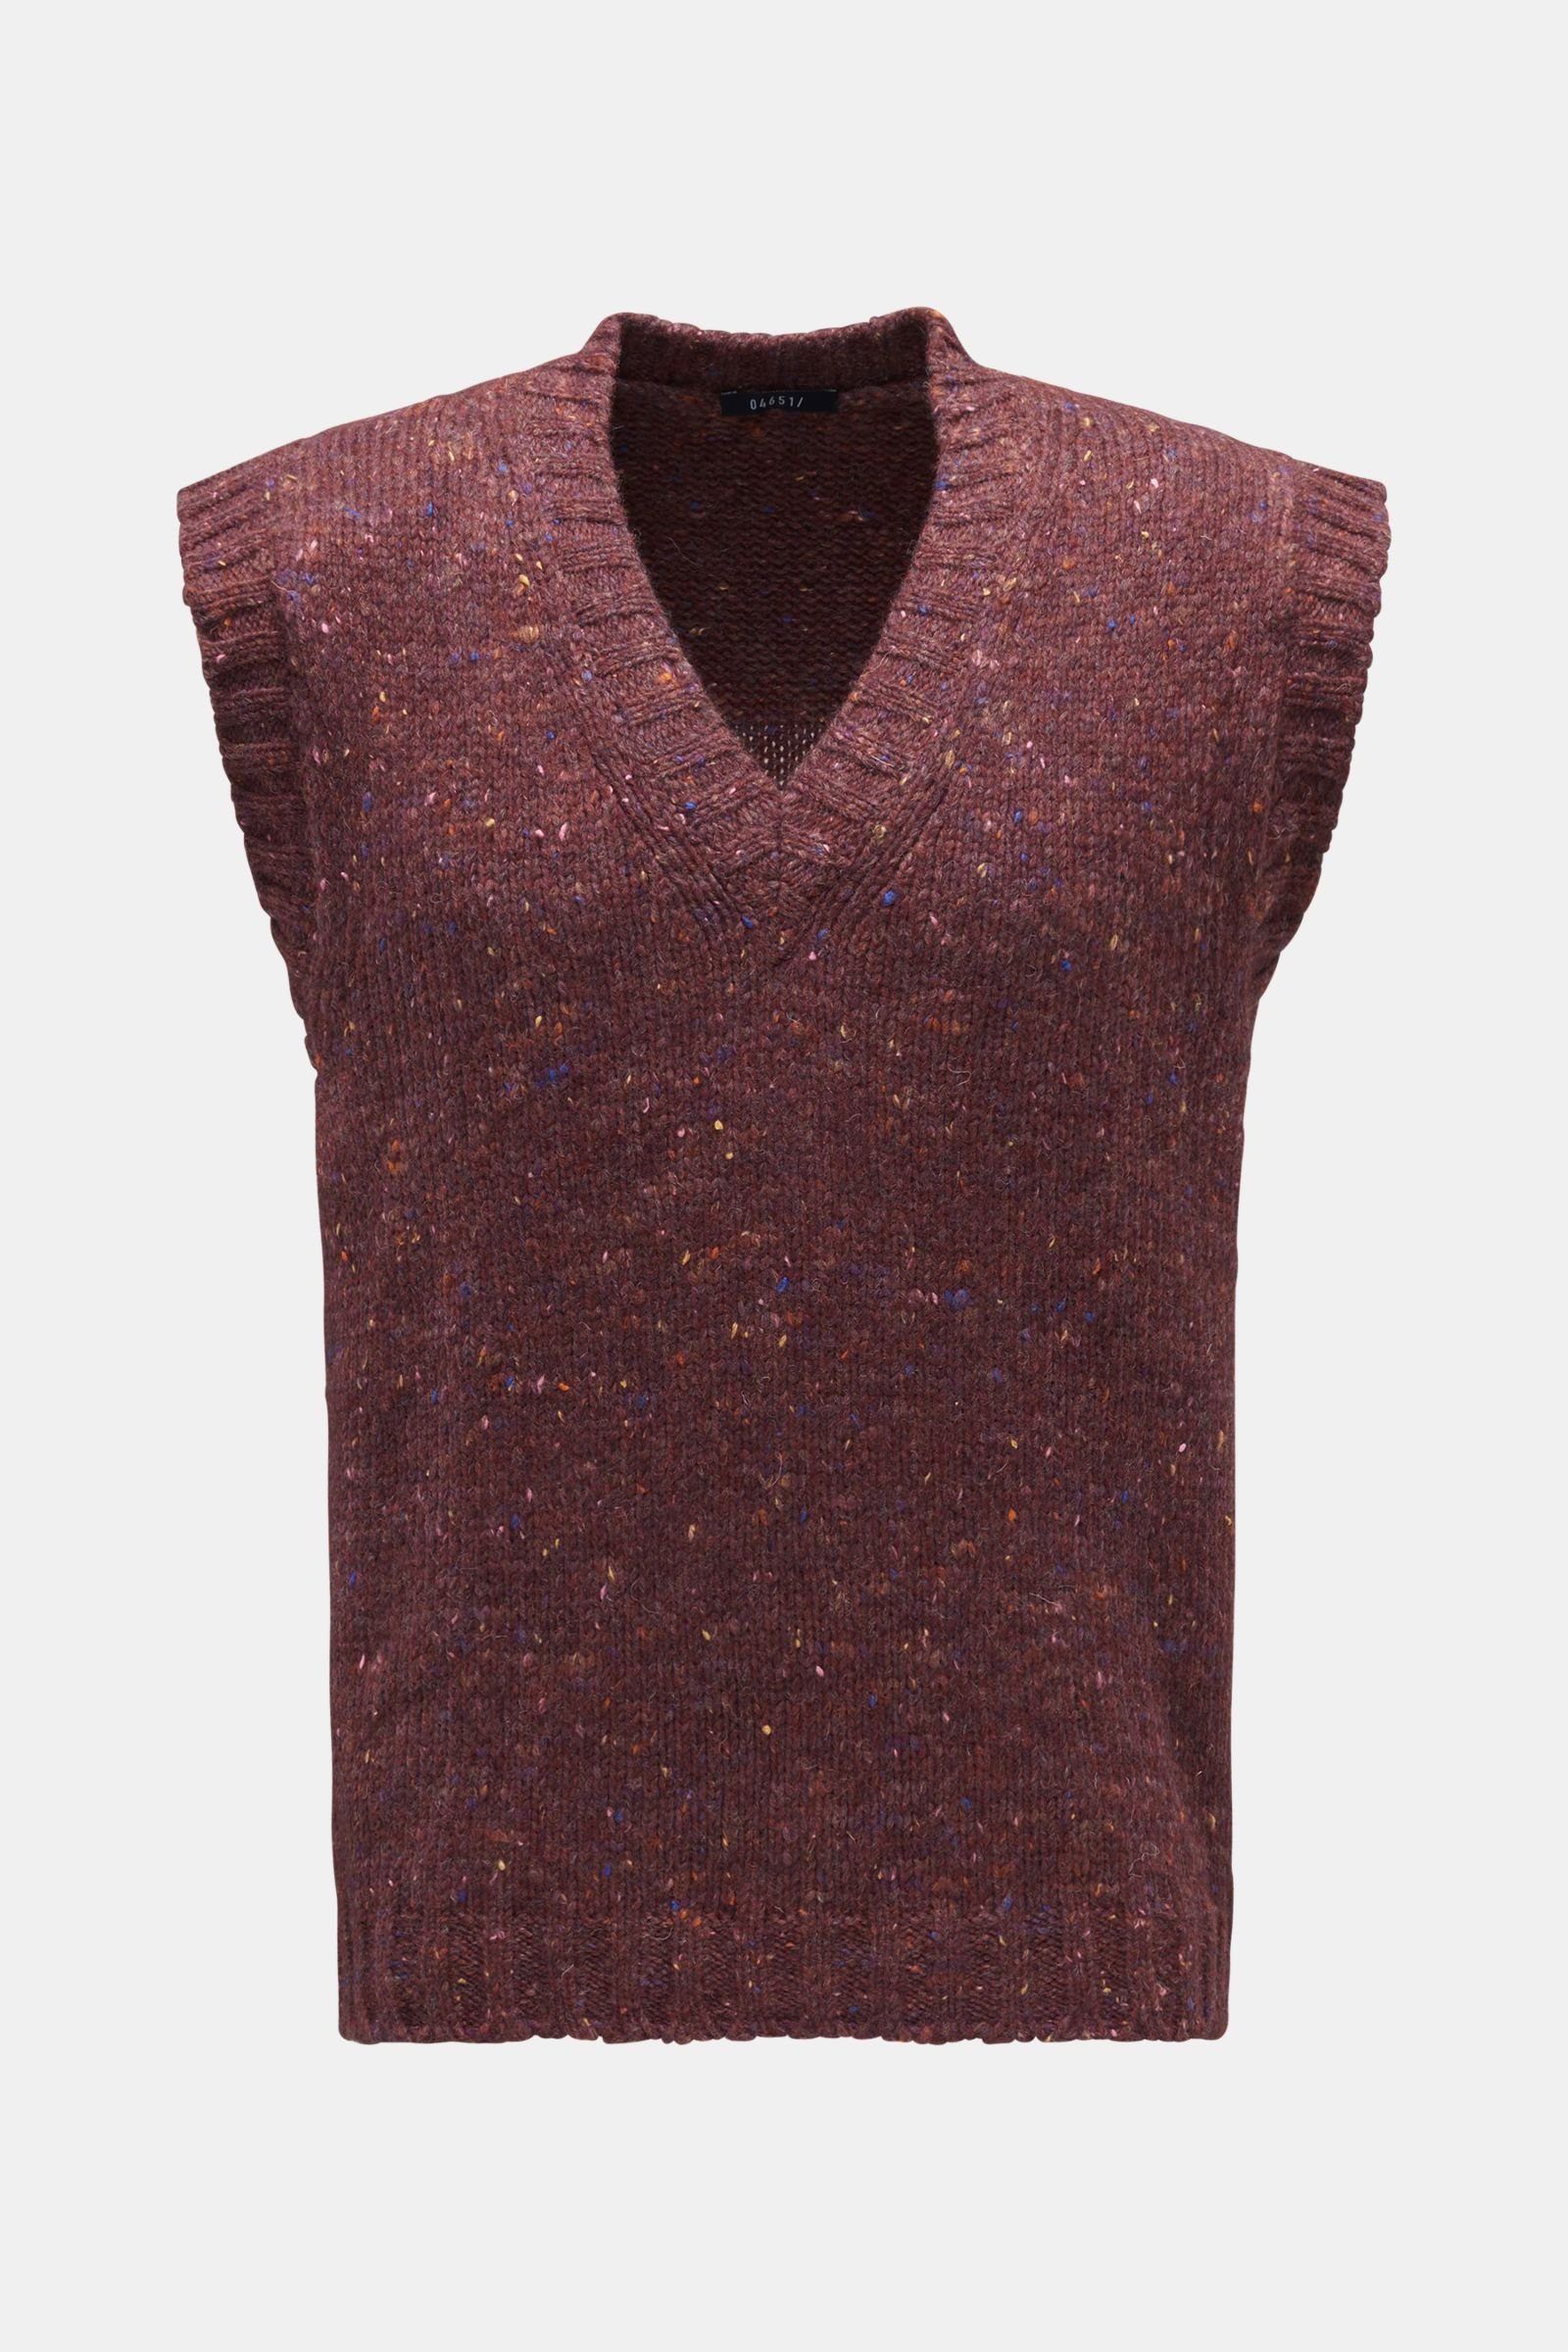 Sweater vest 'Donegal' red-brown/blue patterned